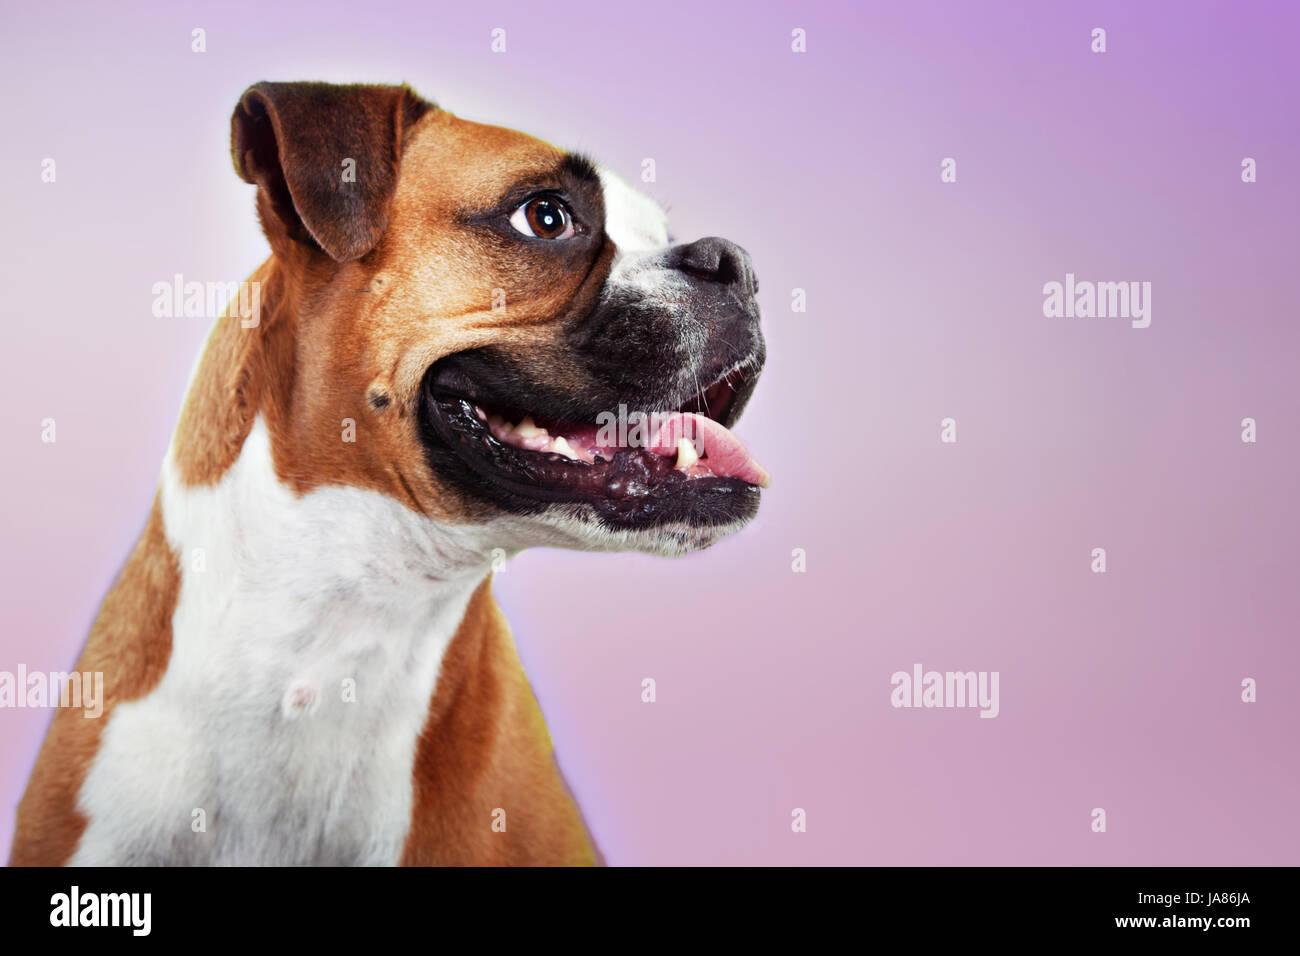 Studio portrait of a boxer dog in profile, smiling and looking alert and eager. Stock Photo